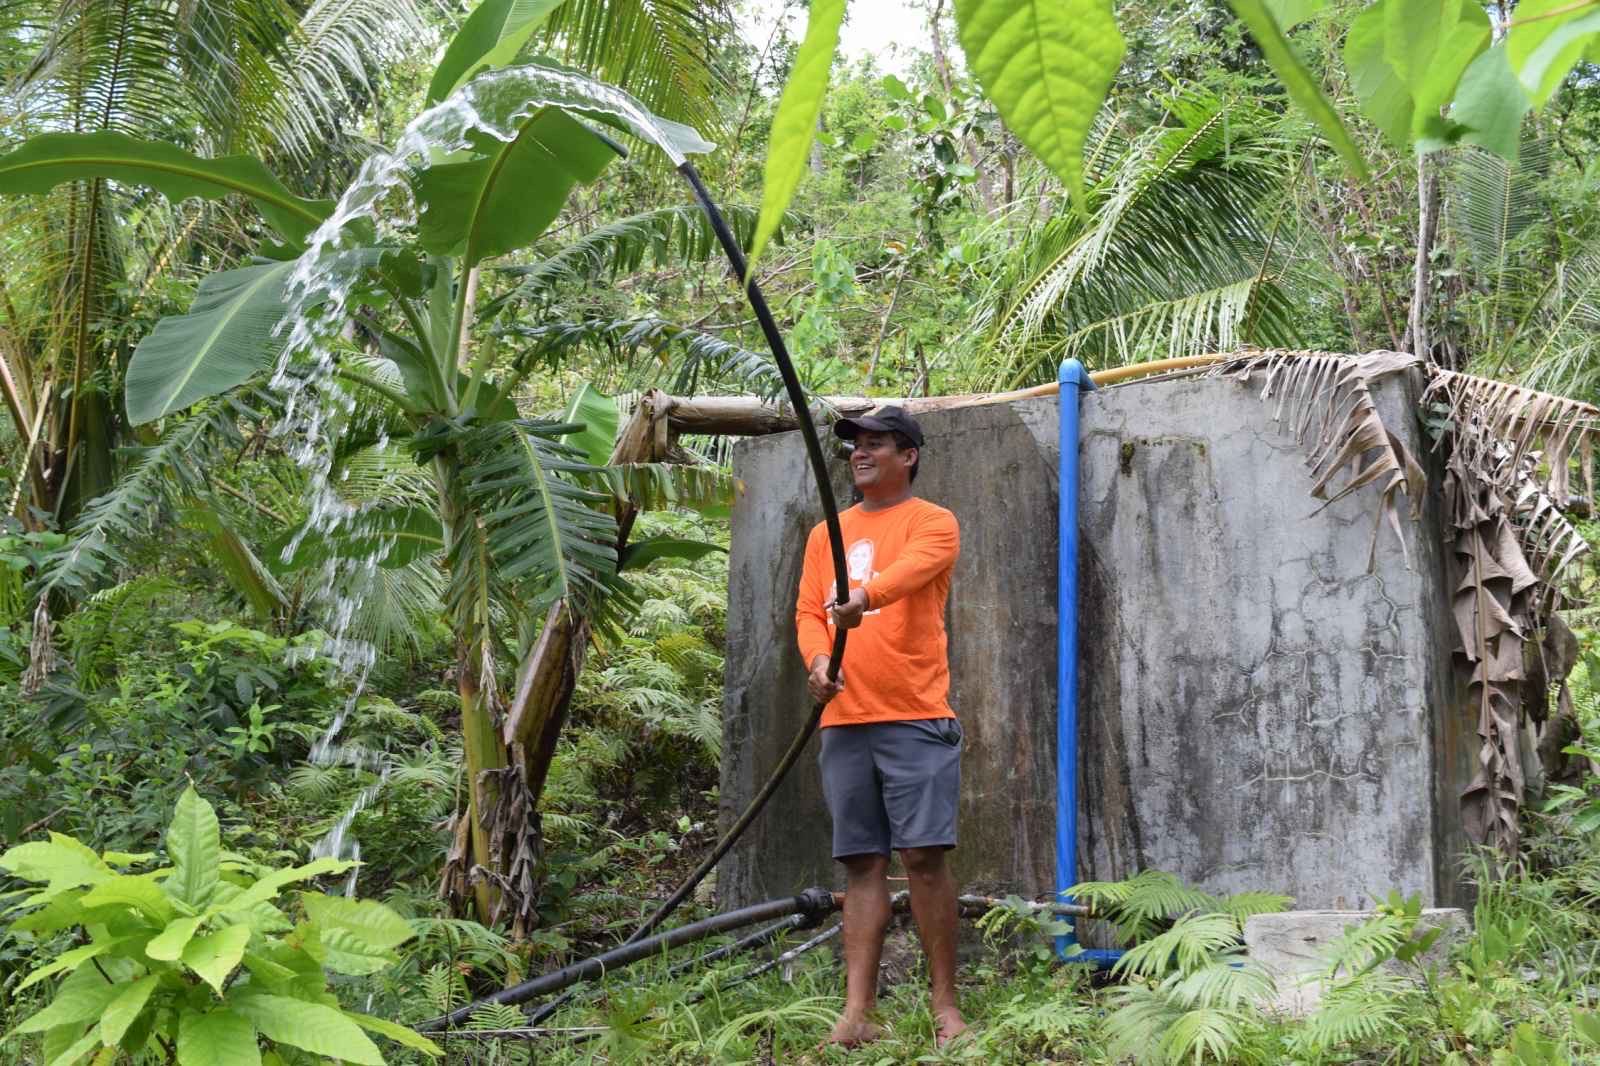 Marcelo Oracion, head of Barangay Oy in Loboc, cannot hide his glee at the strong water pressure coming out of a hose. 